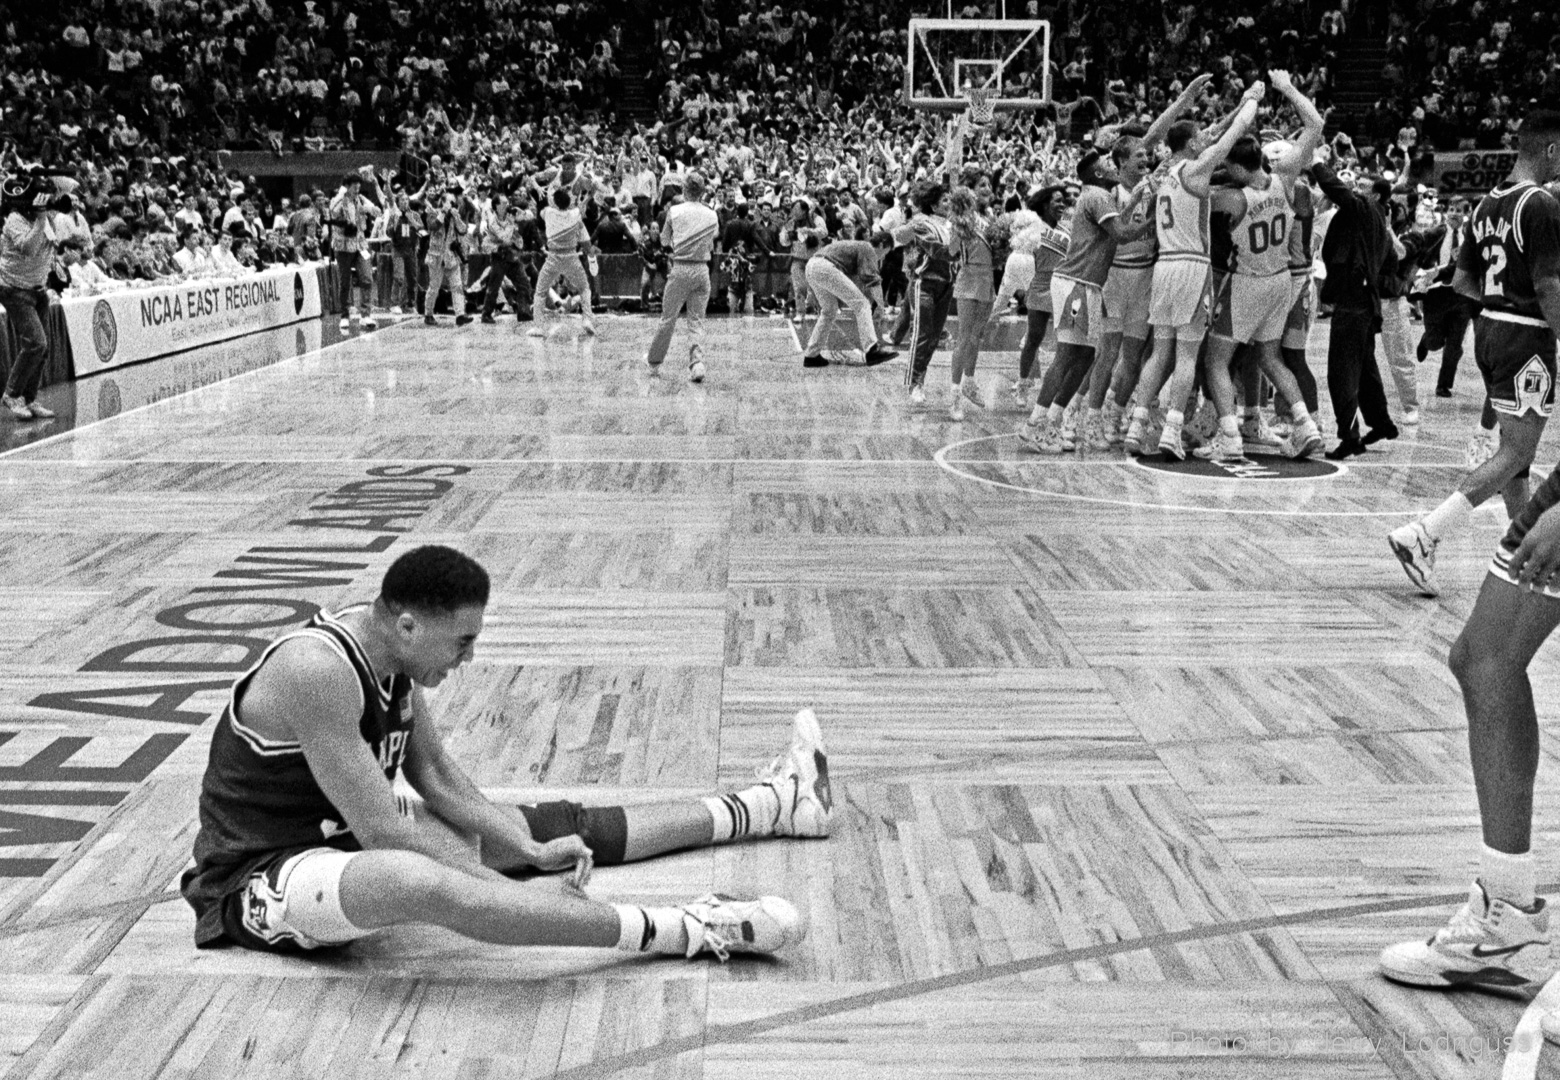 Donald Hodge sits on the court dejected as North Carolina celebrates their victory over Temple in the Eastern Regional Finals in the Meadowlands, NJ on March 24, 1991.